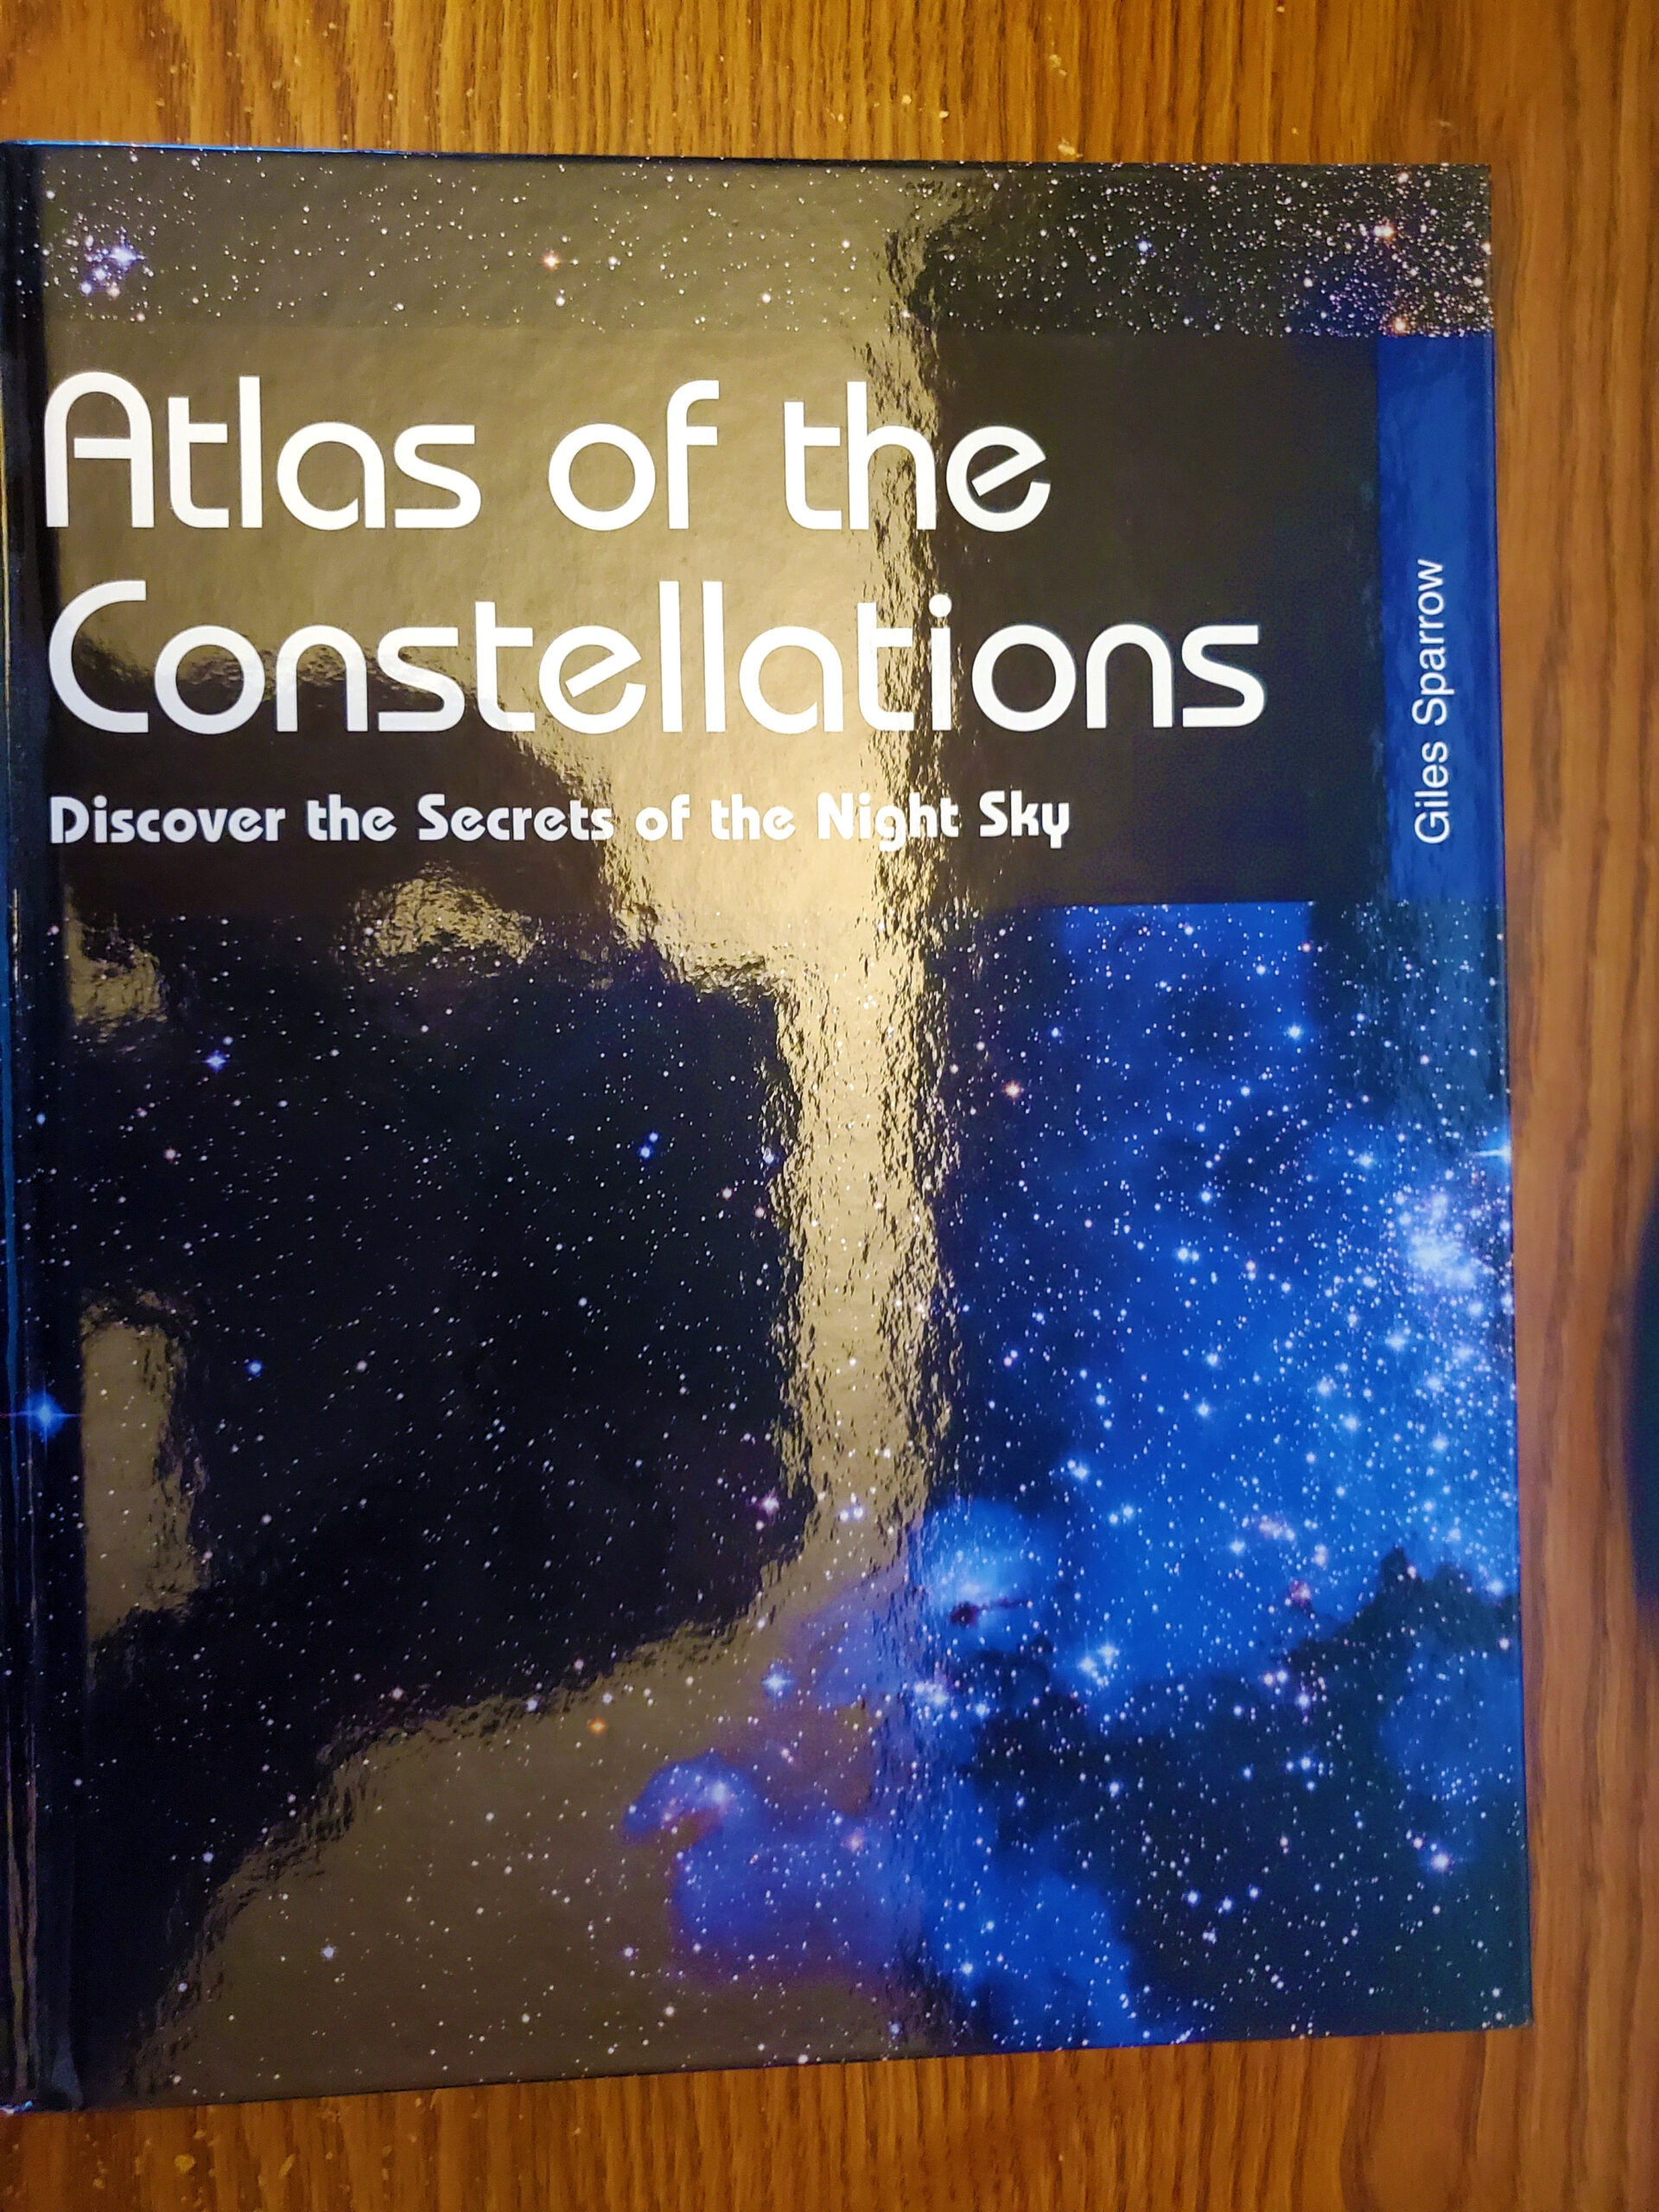 Atlas of the Constellations by Giles Sparrow